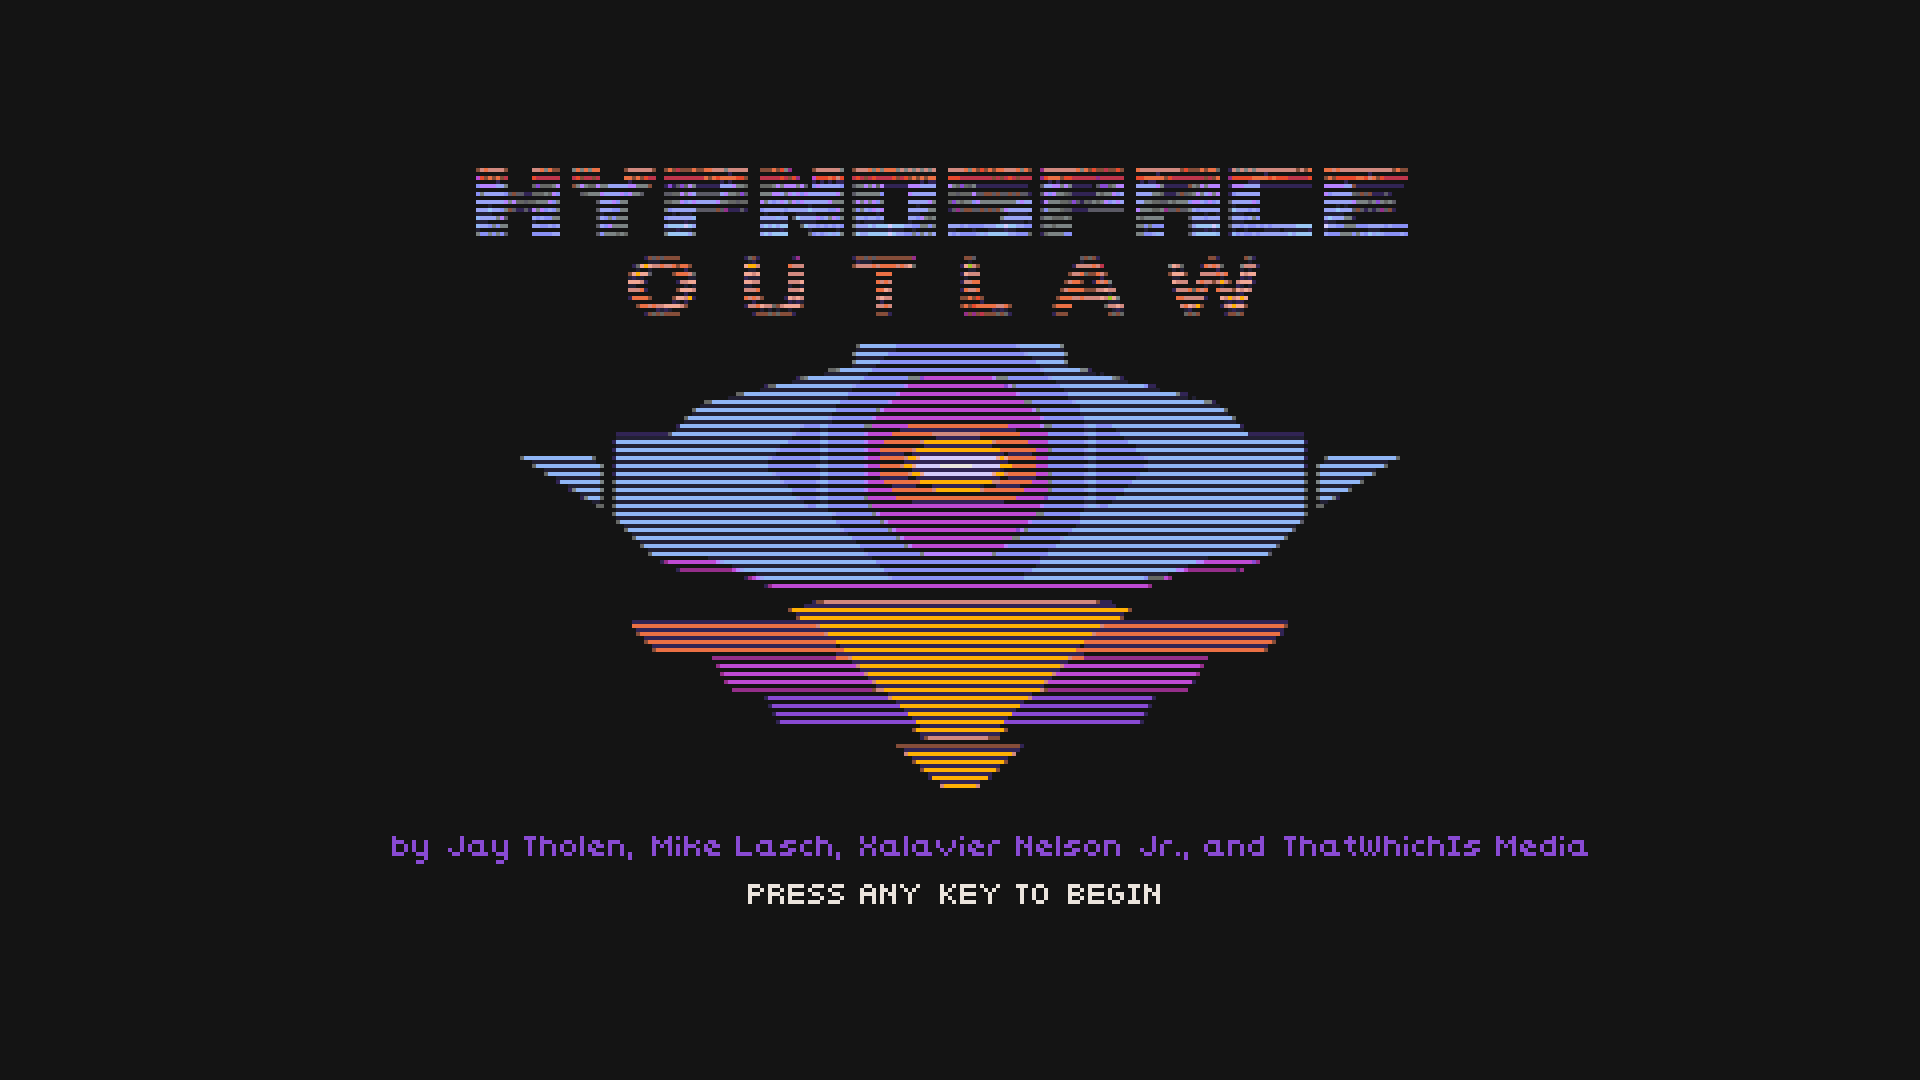 hypnospace outlaws creator